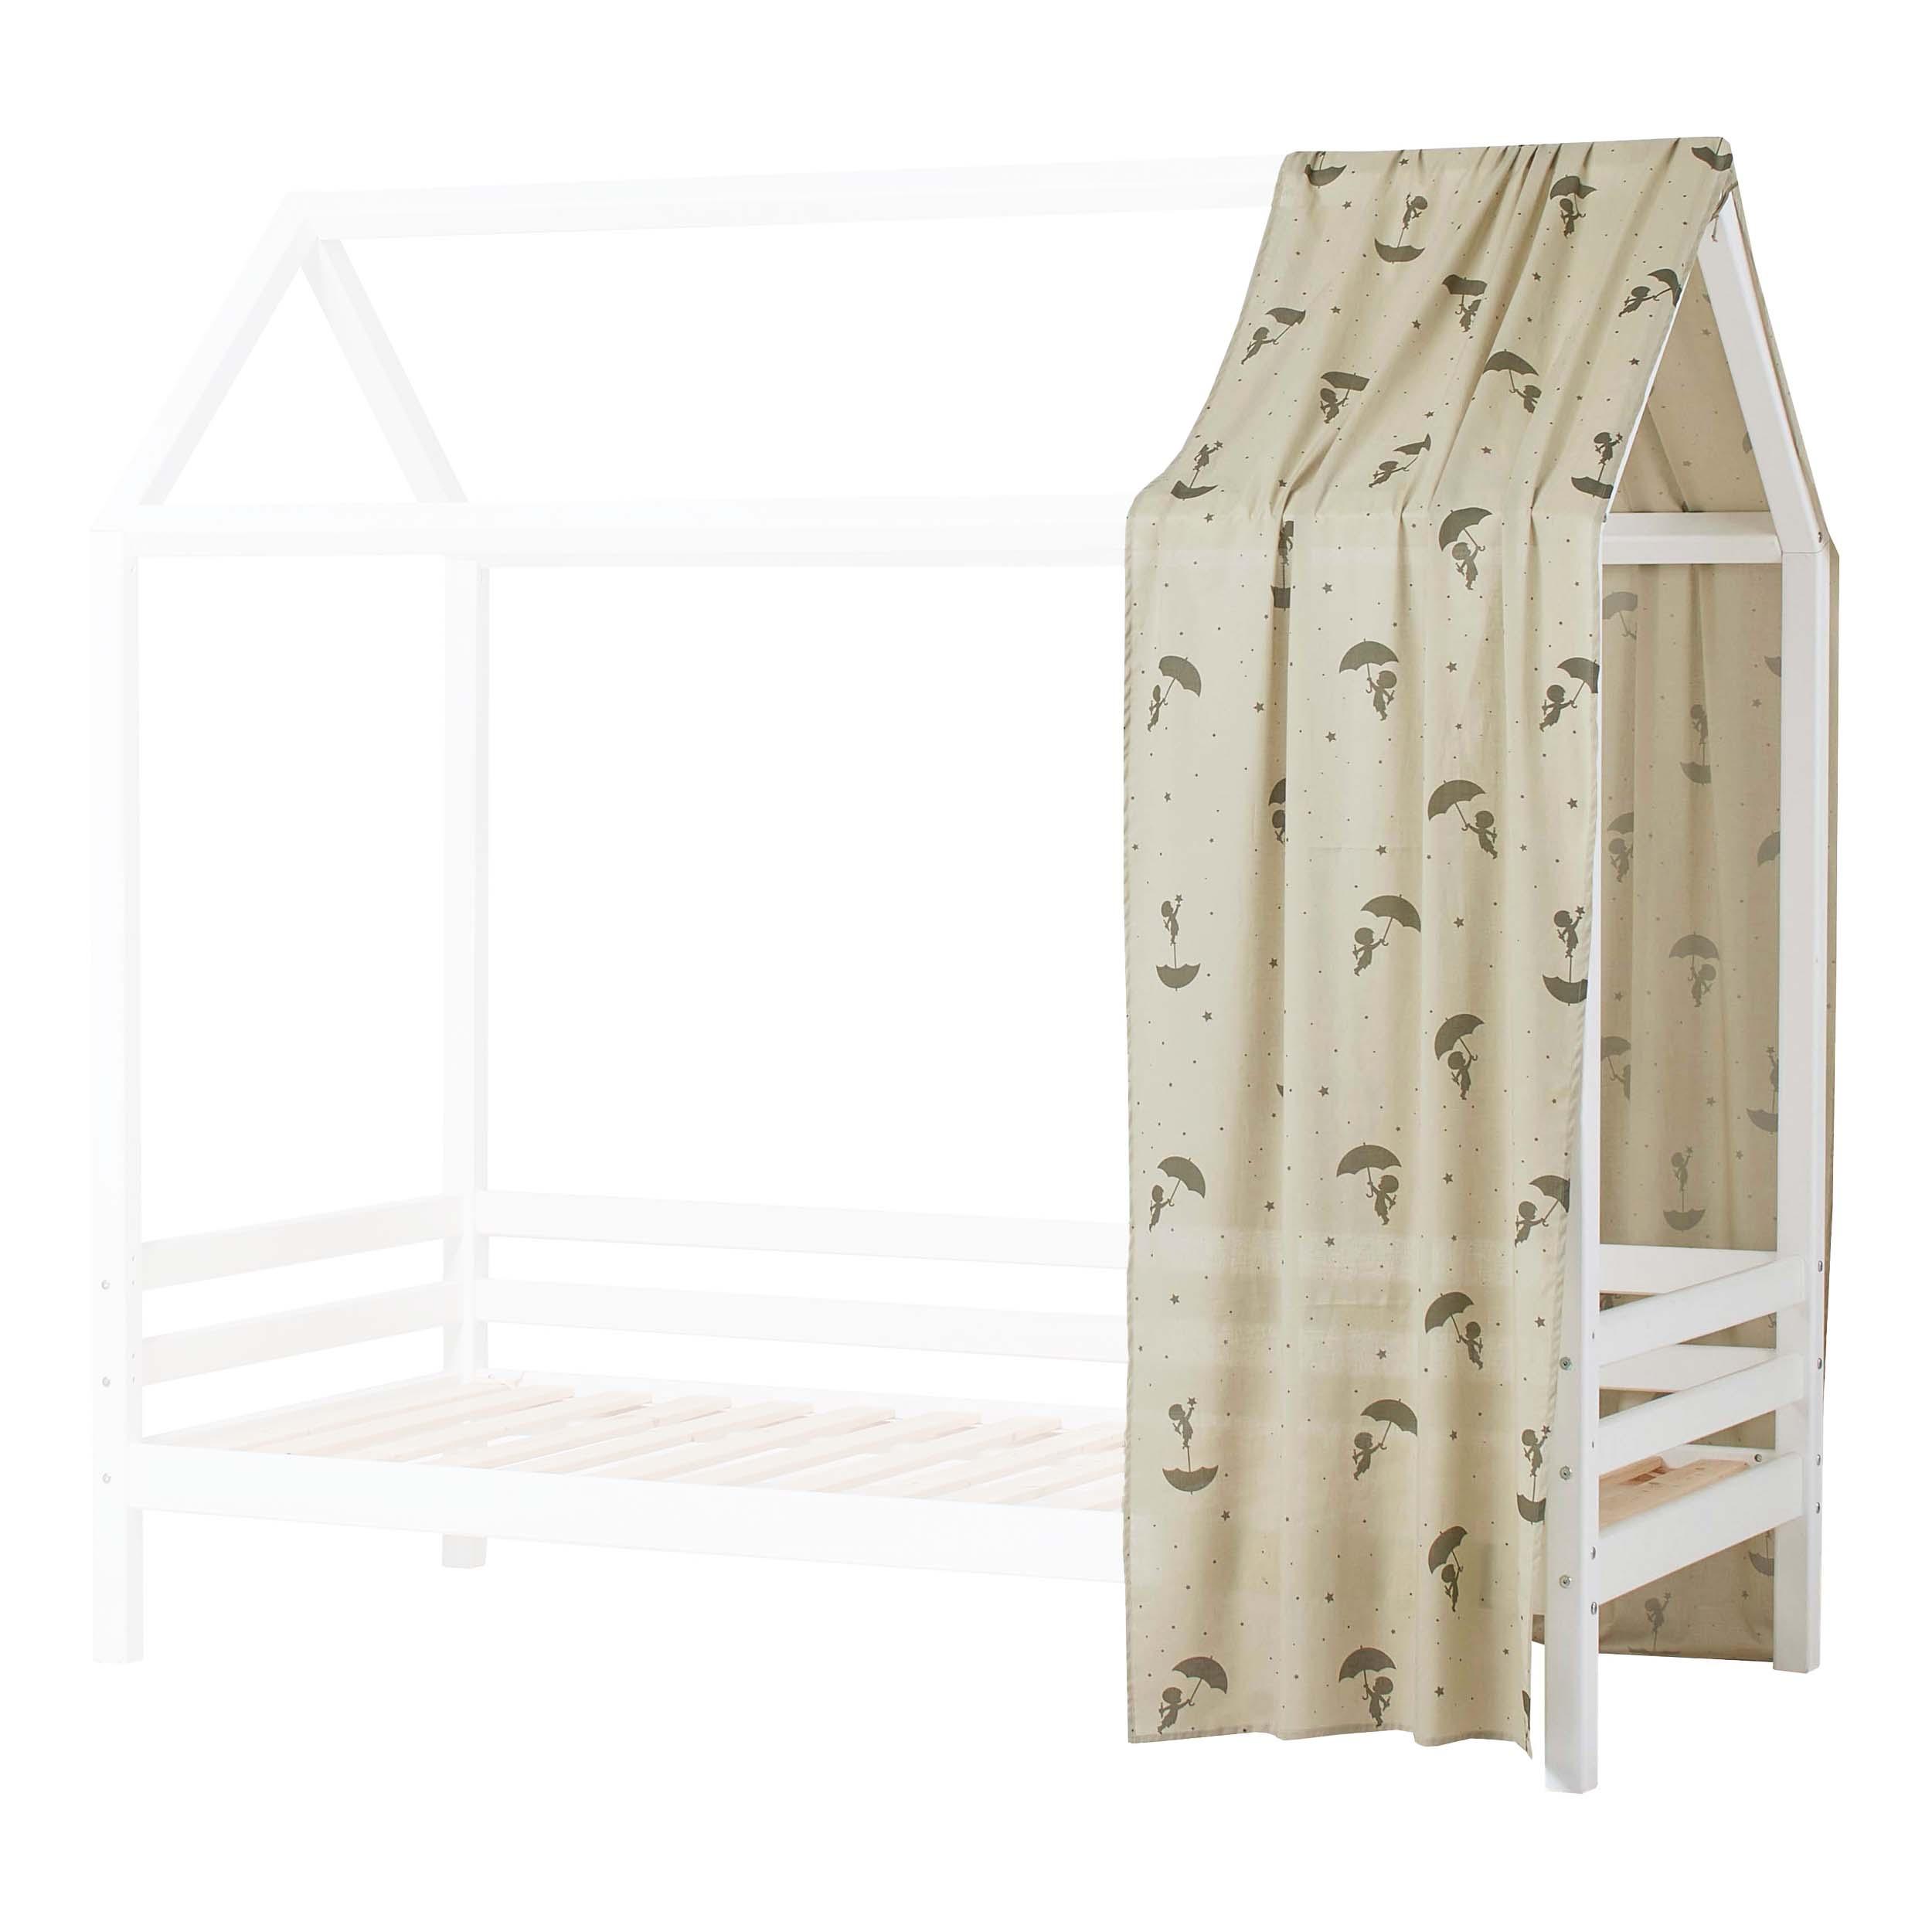 Hoppekids Ole Lukoie Bed Curtain for House Bed, Green